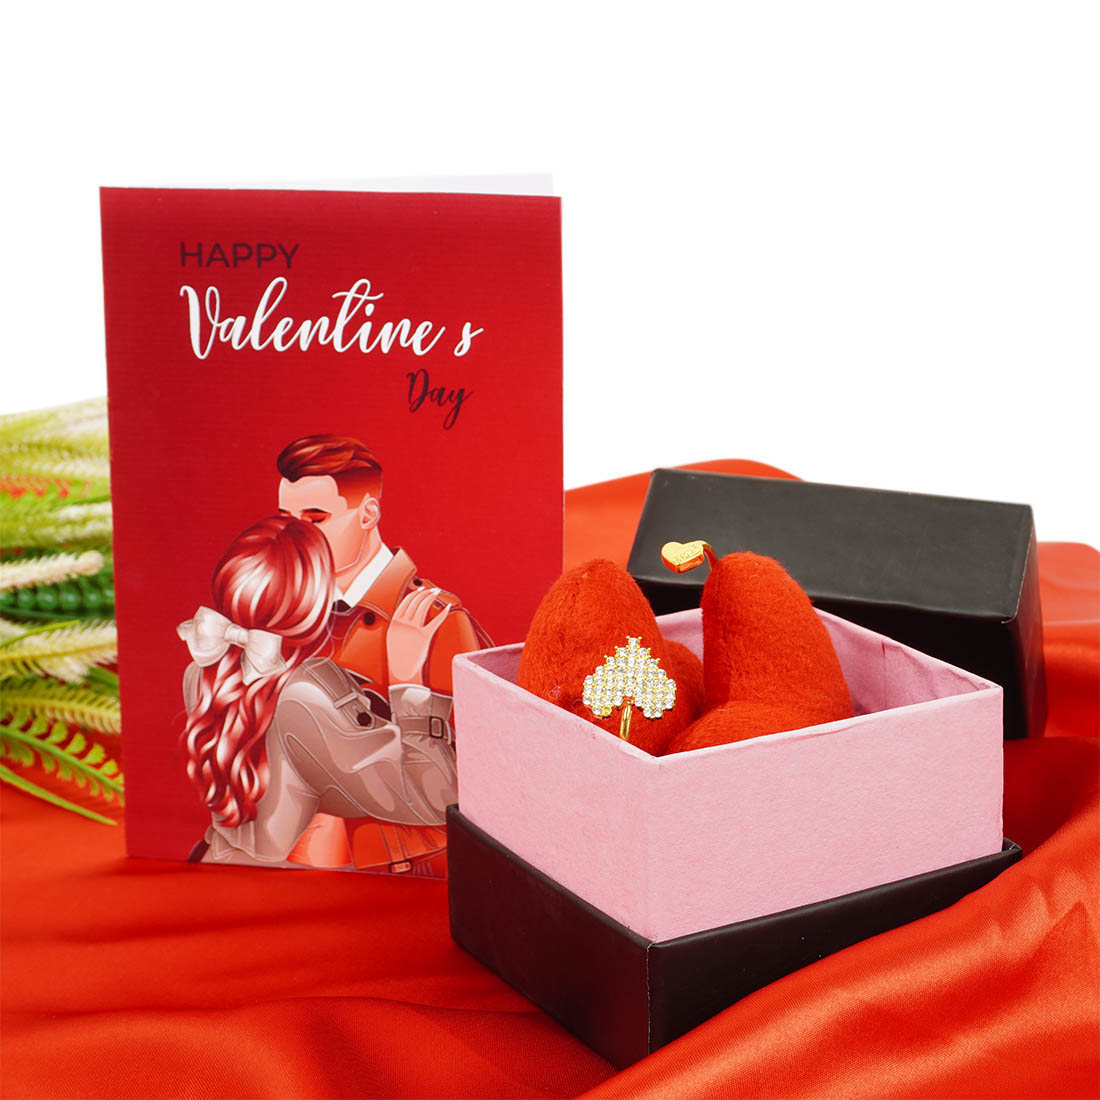 Send Gifts, Gift Baskets & Hampers for Girlfriend to Philippines Online